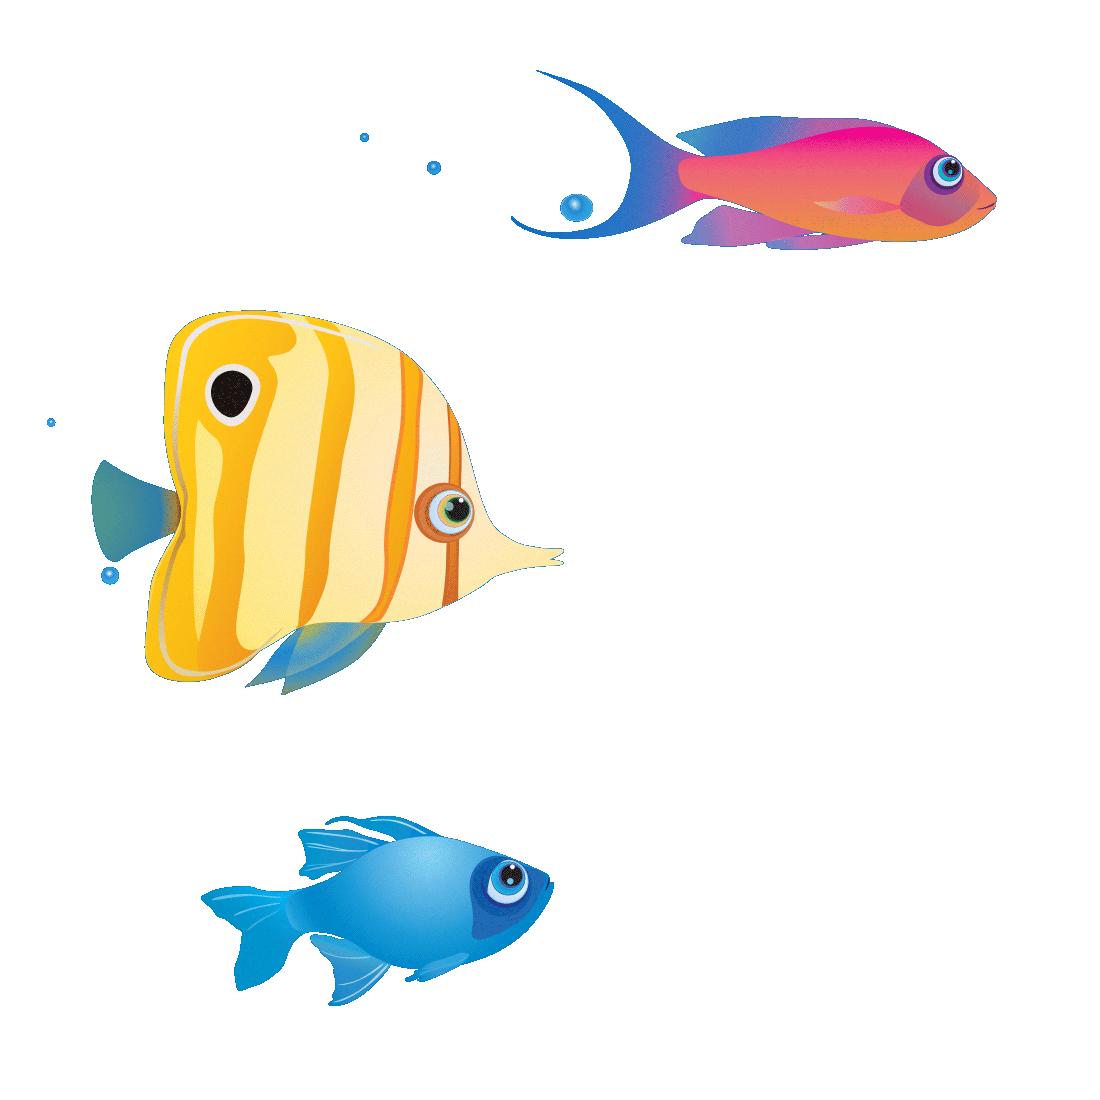 Splash clipart fish splash, Splash fish splash Transparent FREE for